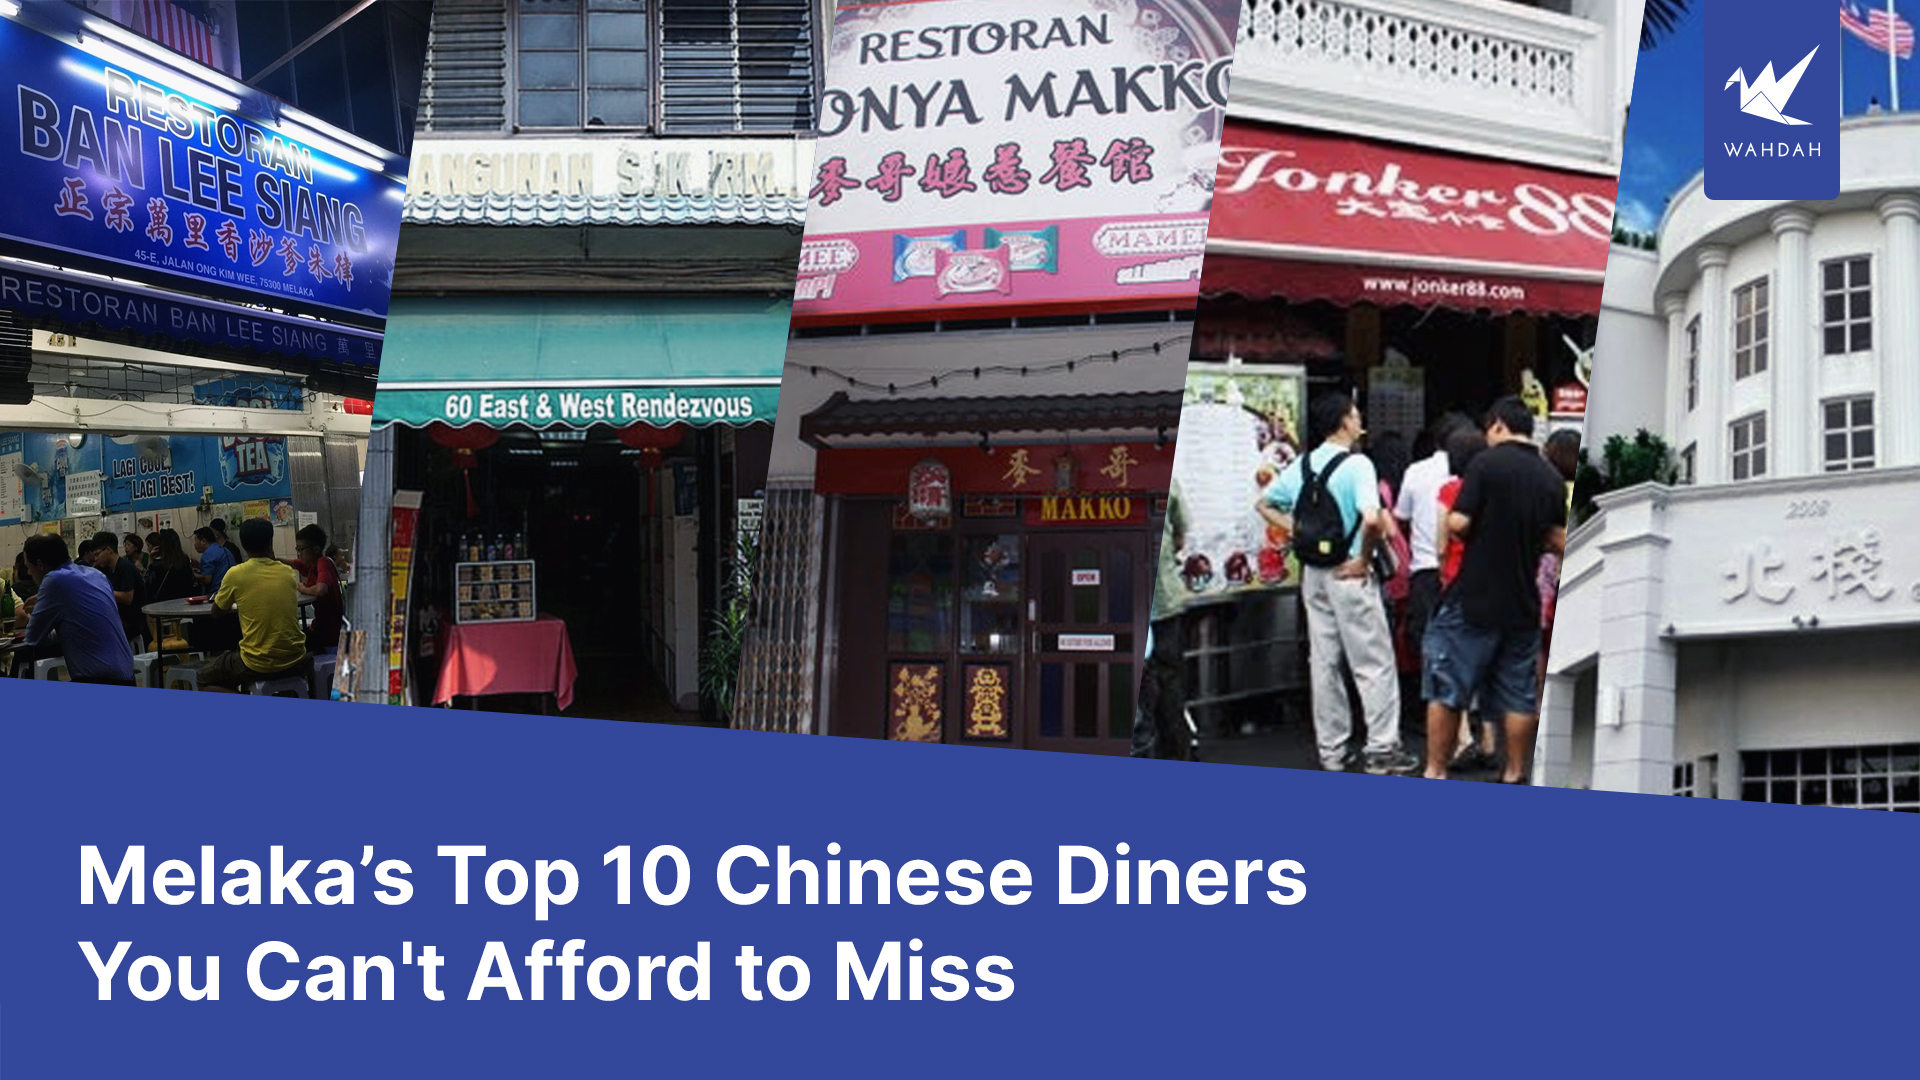 Melaka’s Top 10 Chinese Diners You Can't Afford to Miss